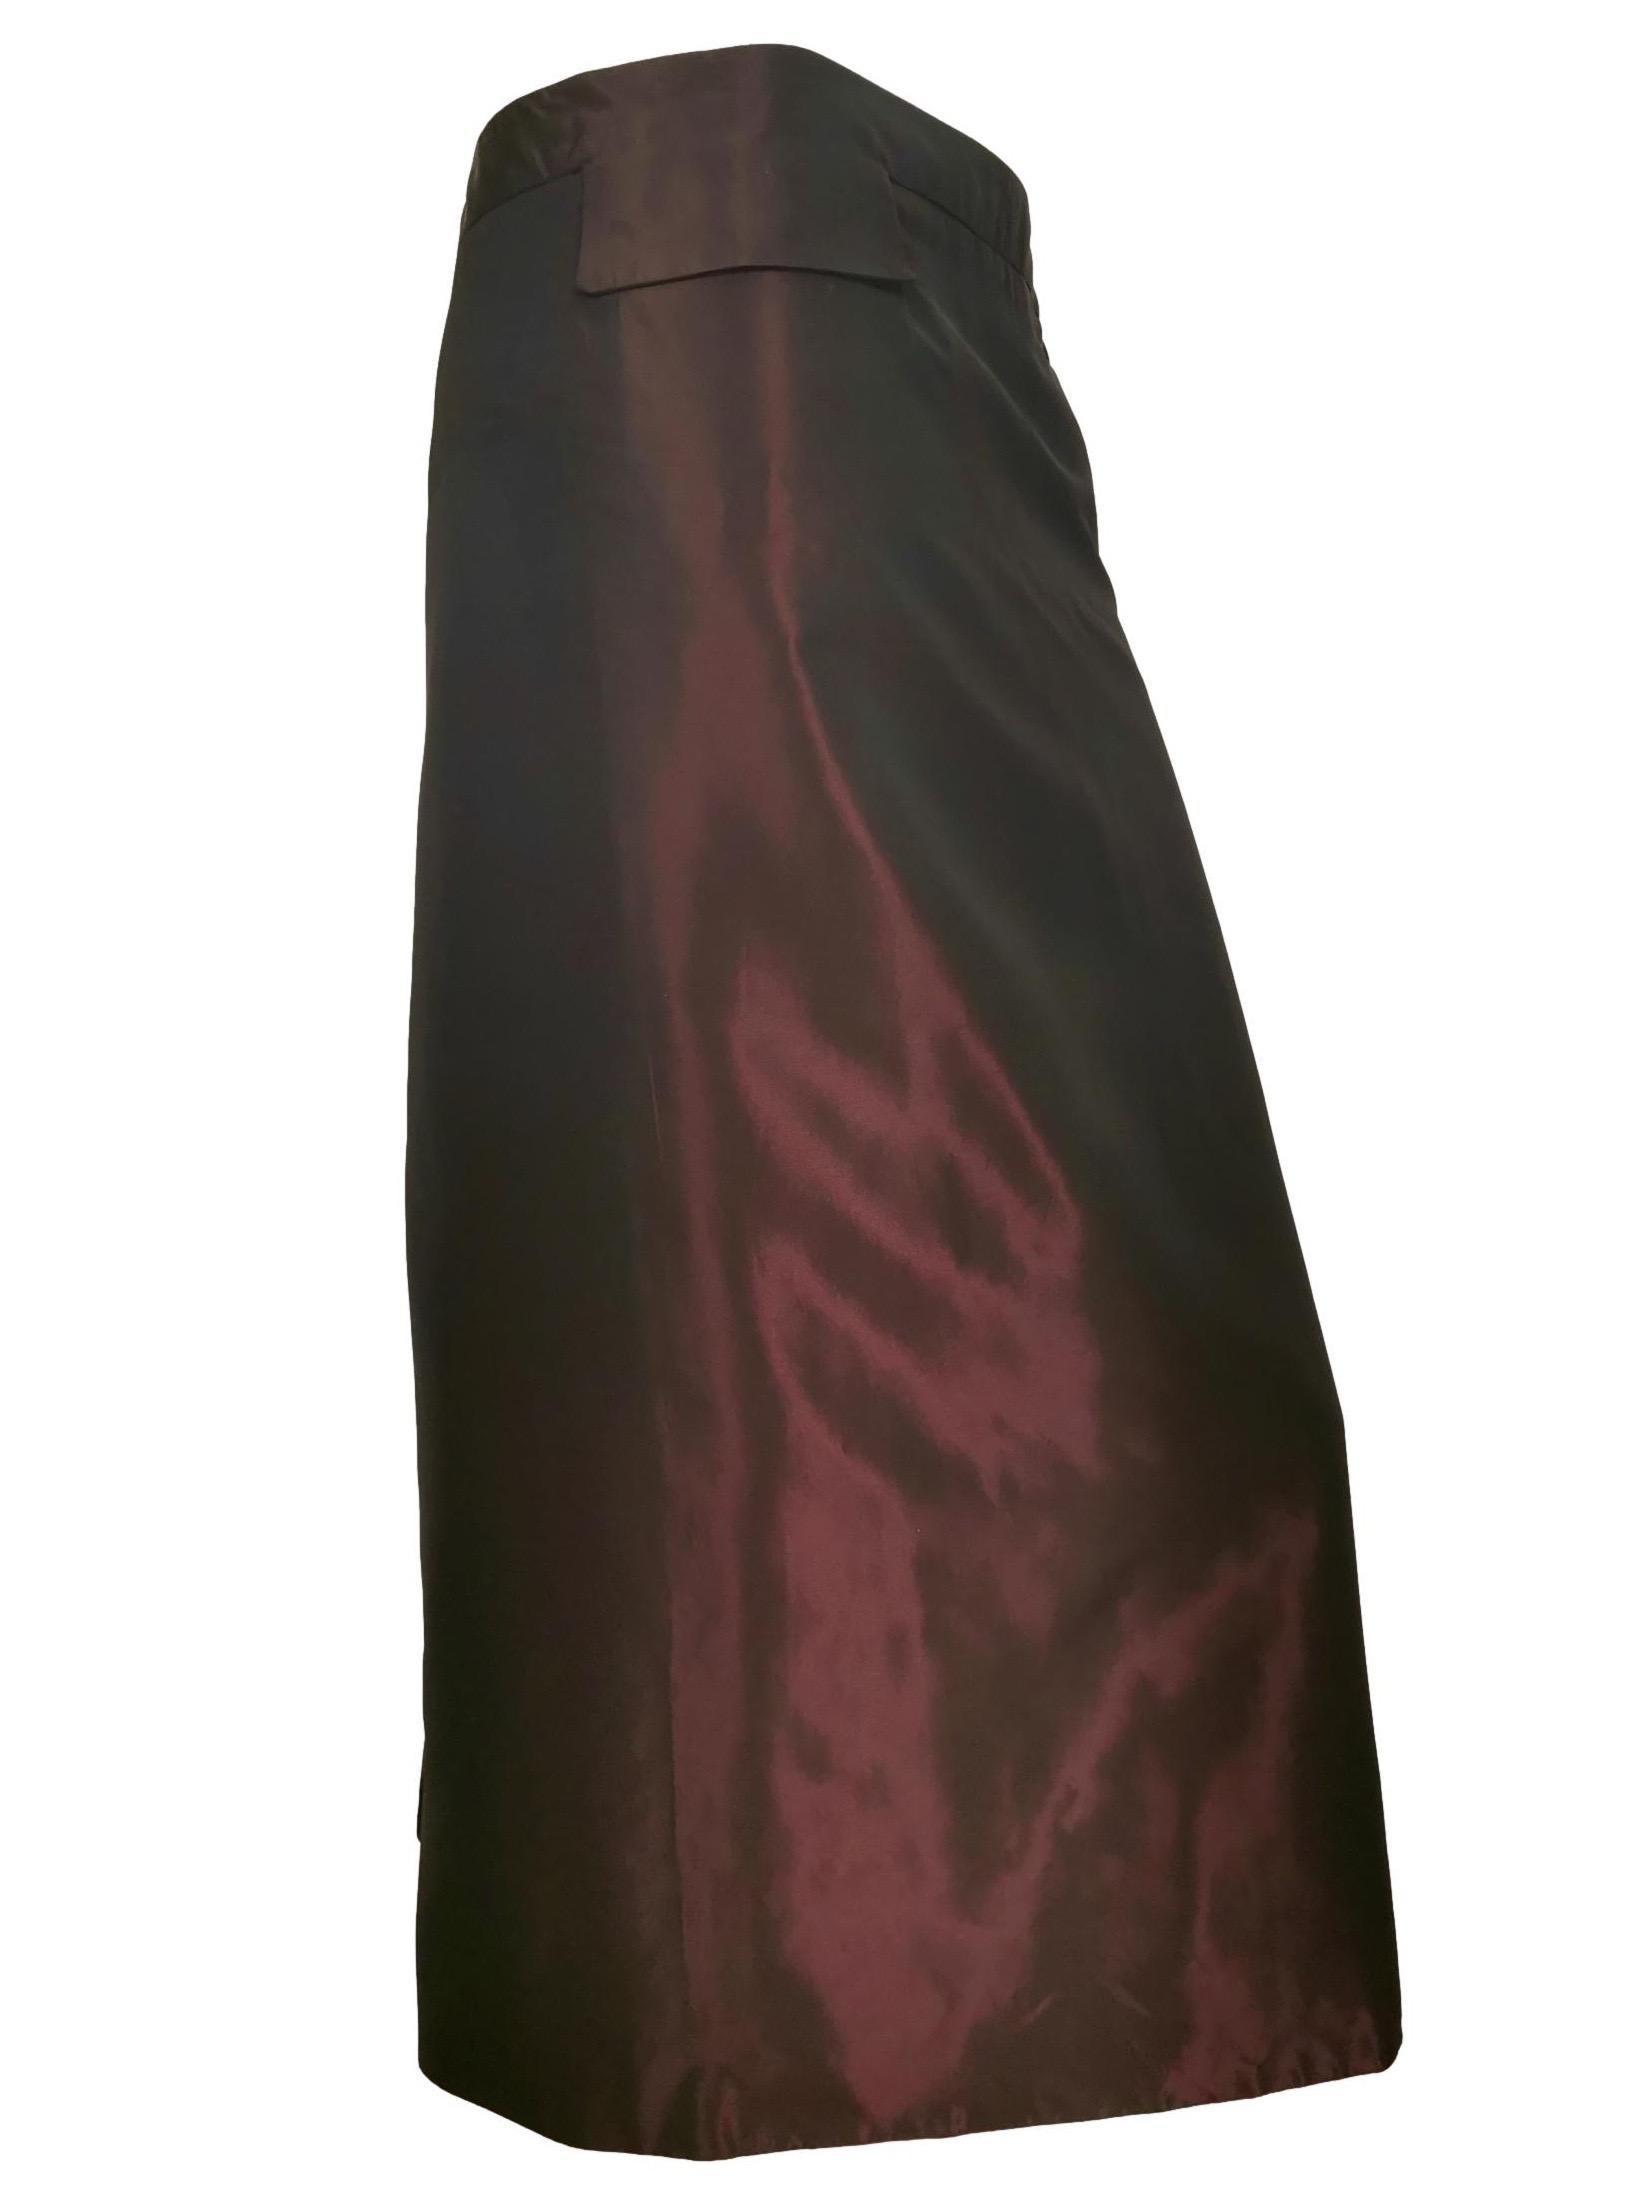 Alexander McQueen Two Tone Kick Pleat Fitted Skirt 1996 For Sale 2